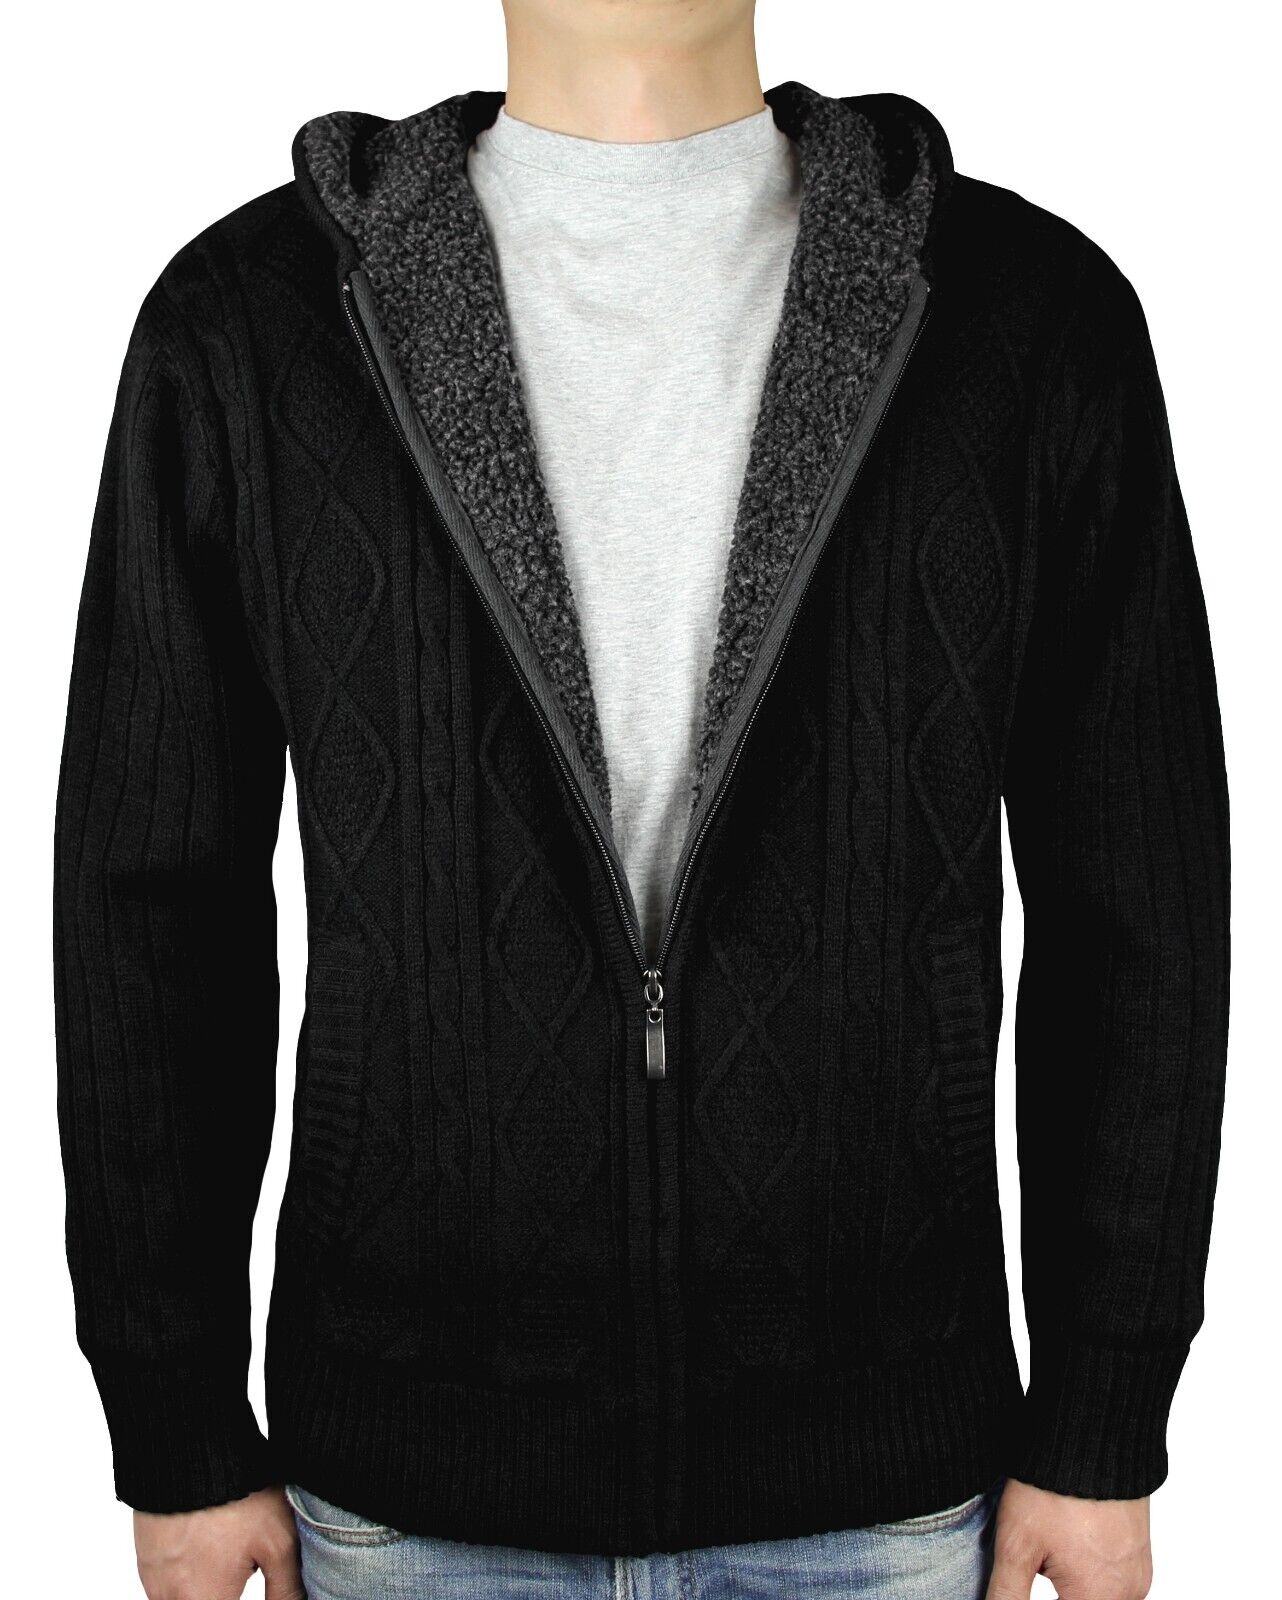 Blue Ocean Mens Cable Sweater Jacket w/Sherpa lining(sw-675)